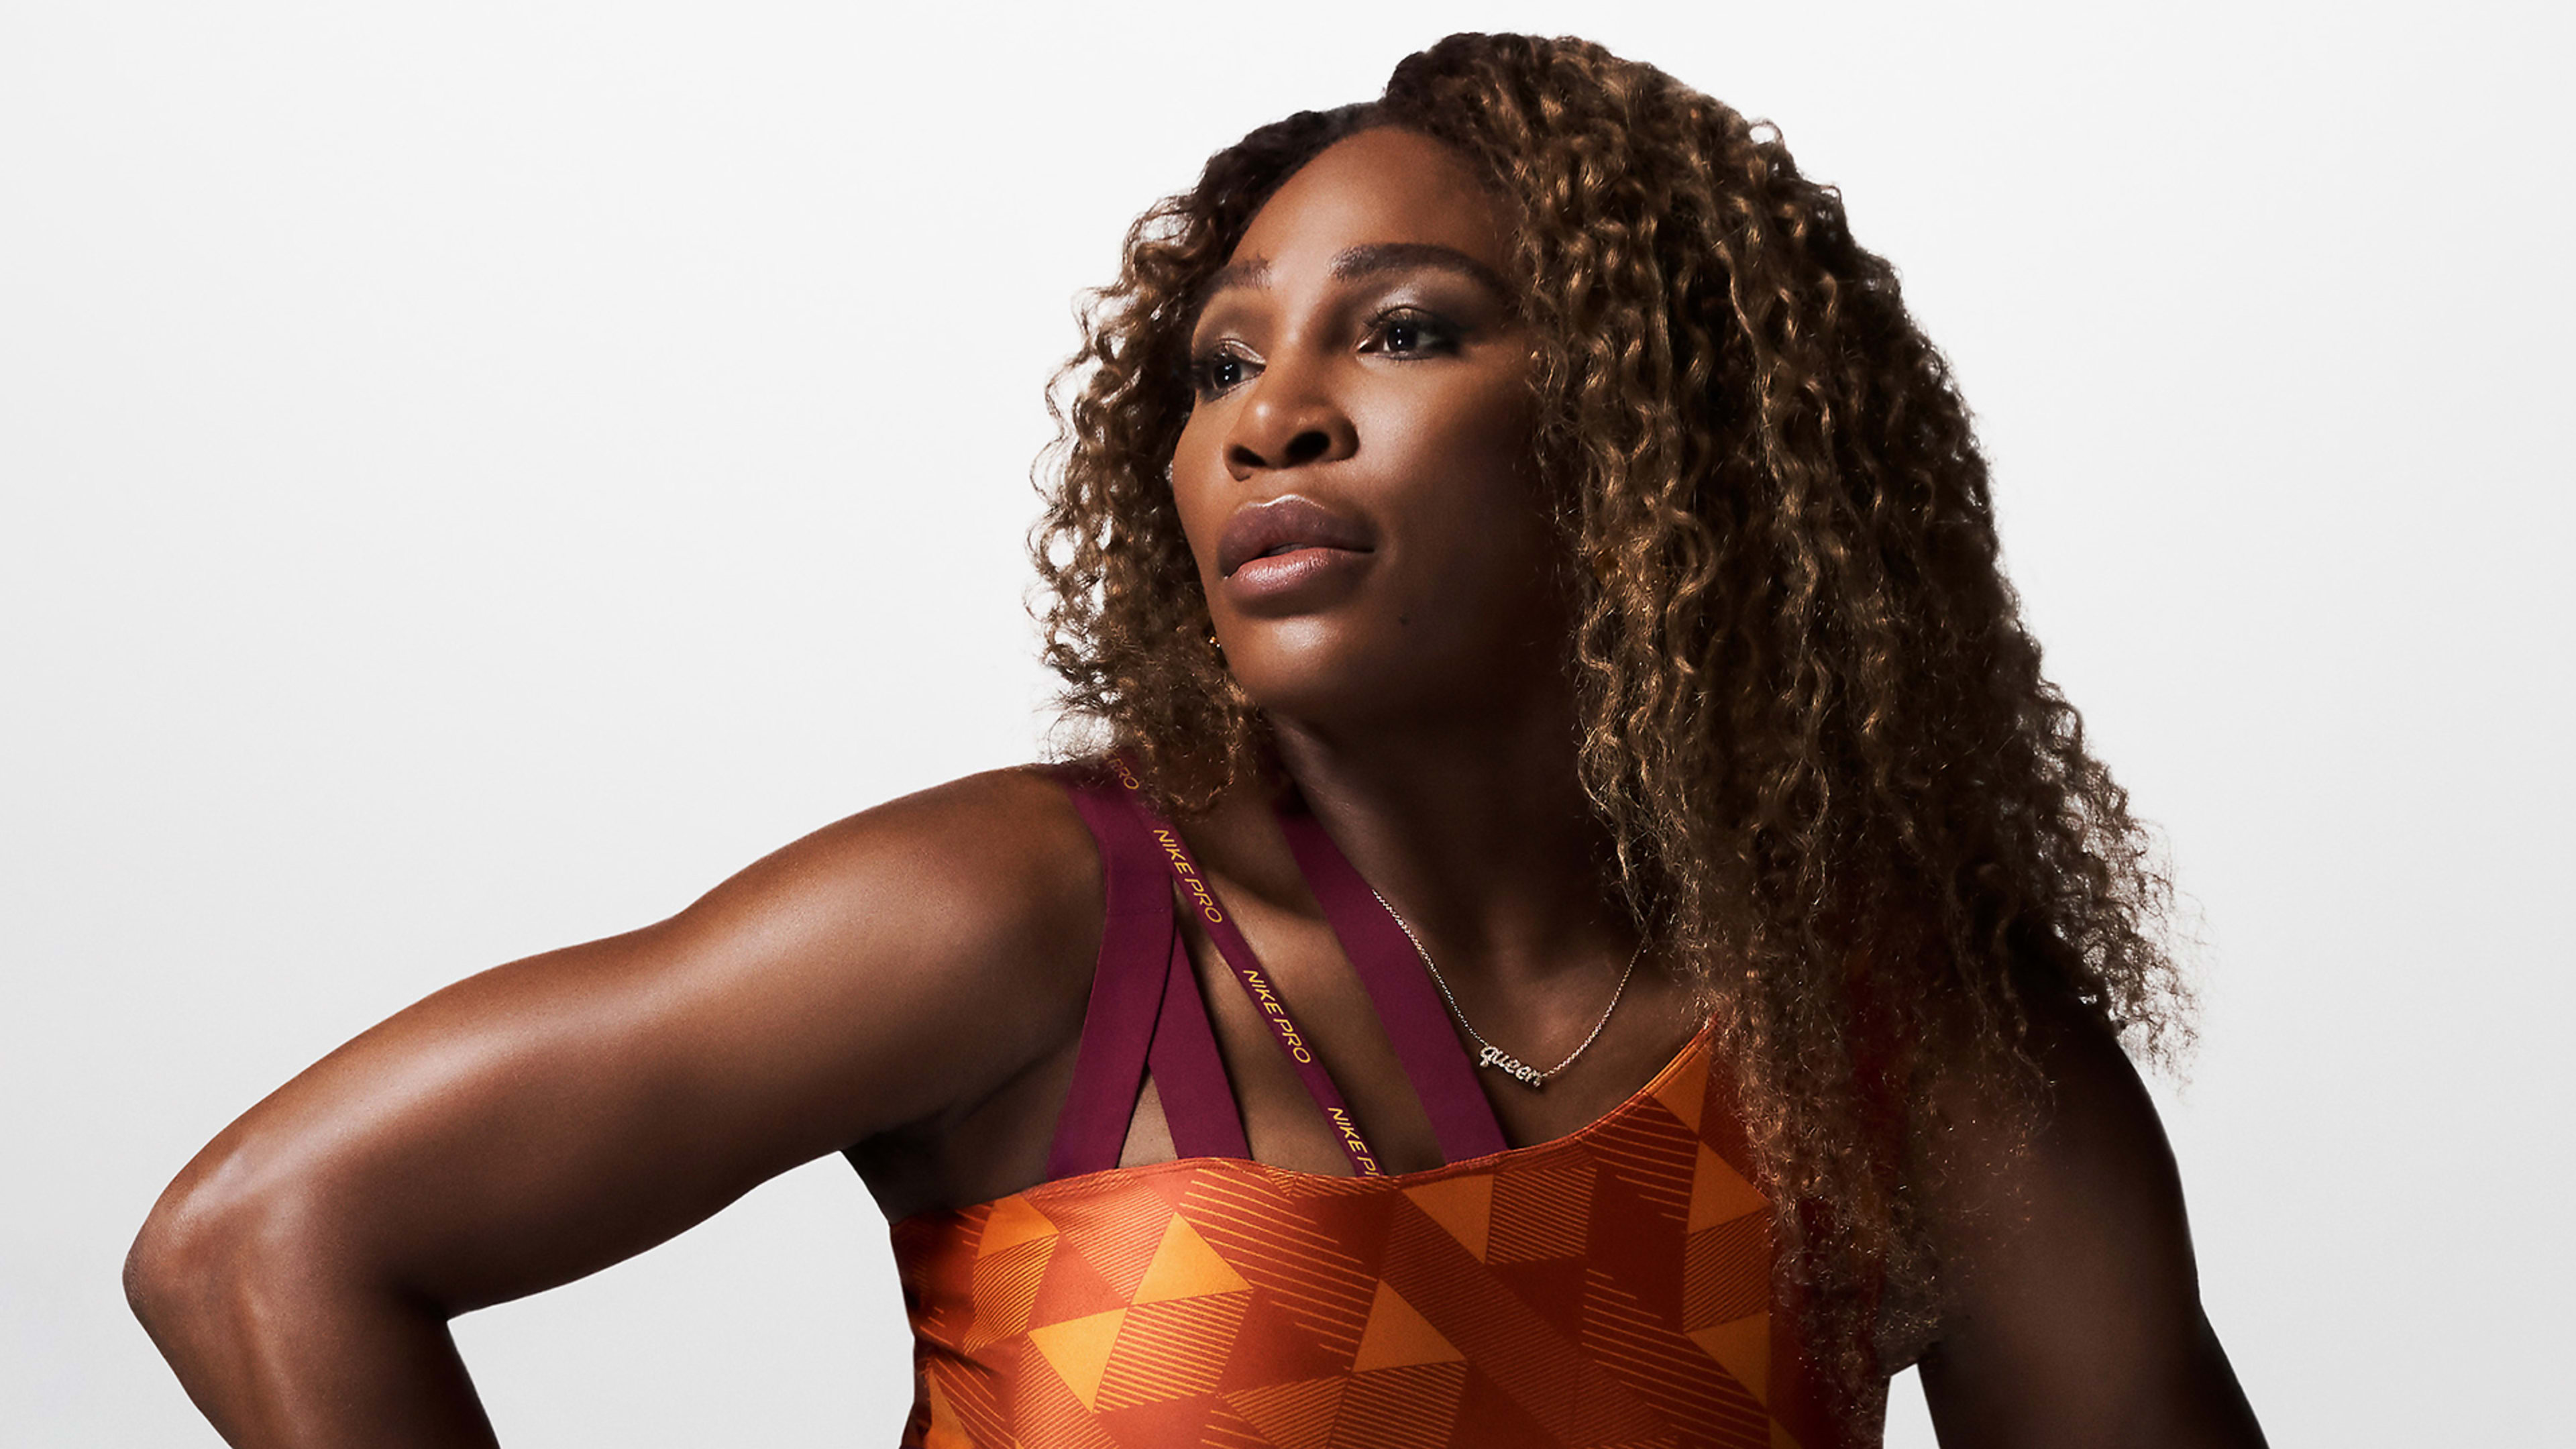 Serena Williams: ‘I want to see more people in design that look like me’